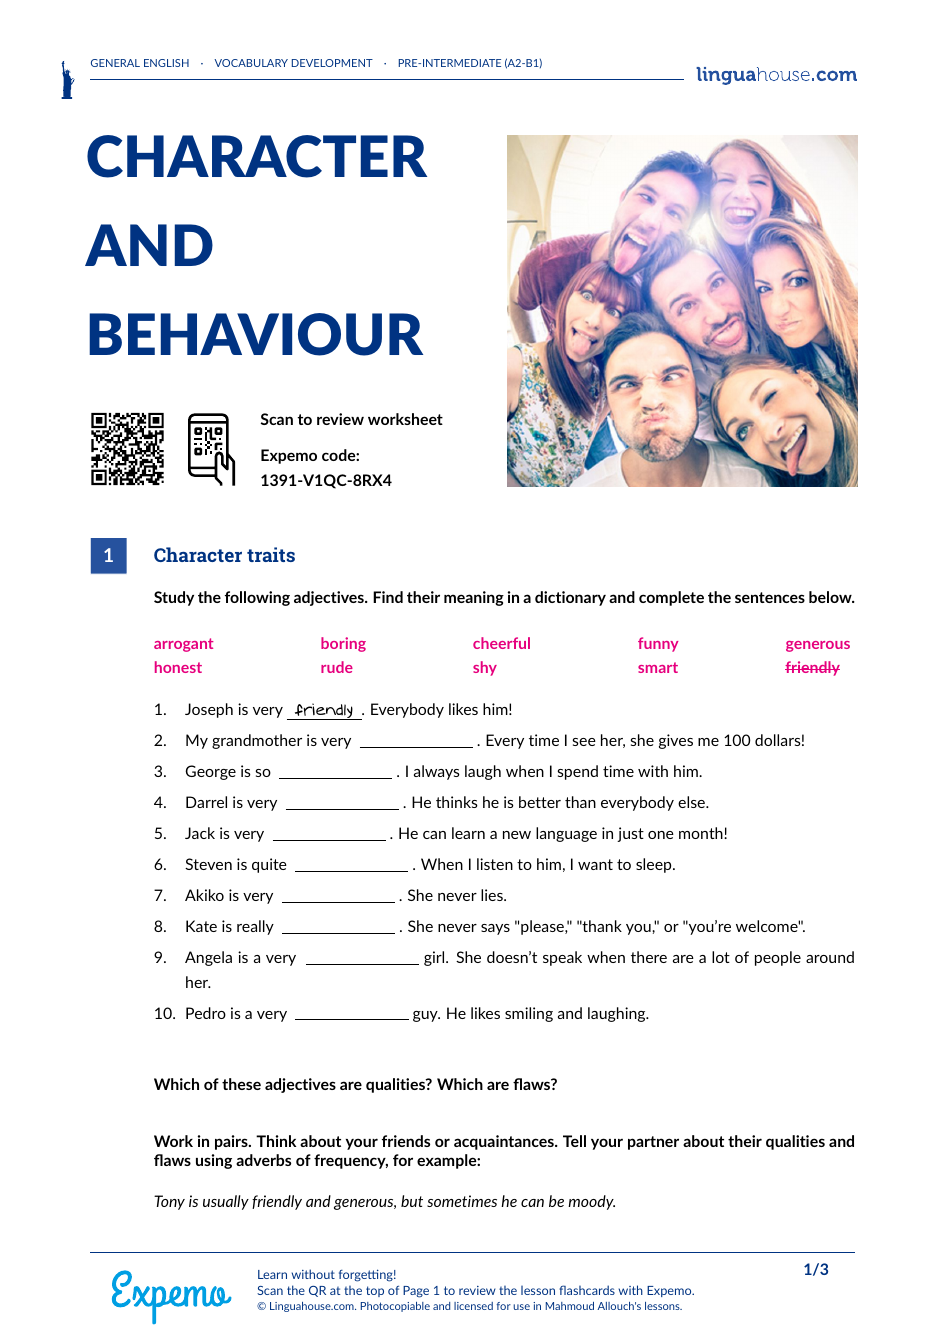 Pre-intermediate English Worksheet: Character and Behaviour - Linguahouse, Page 1